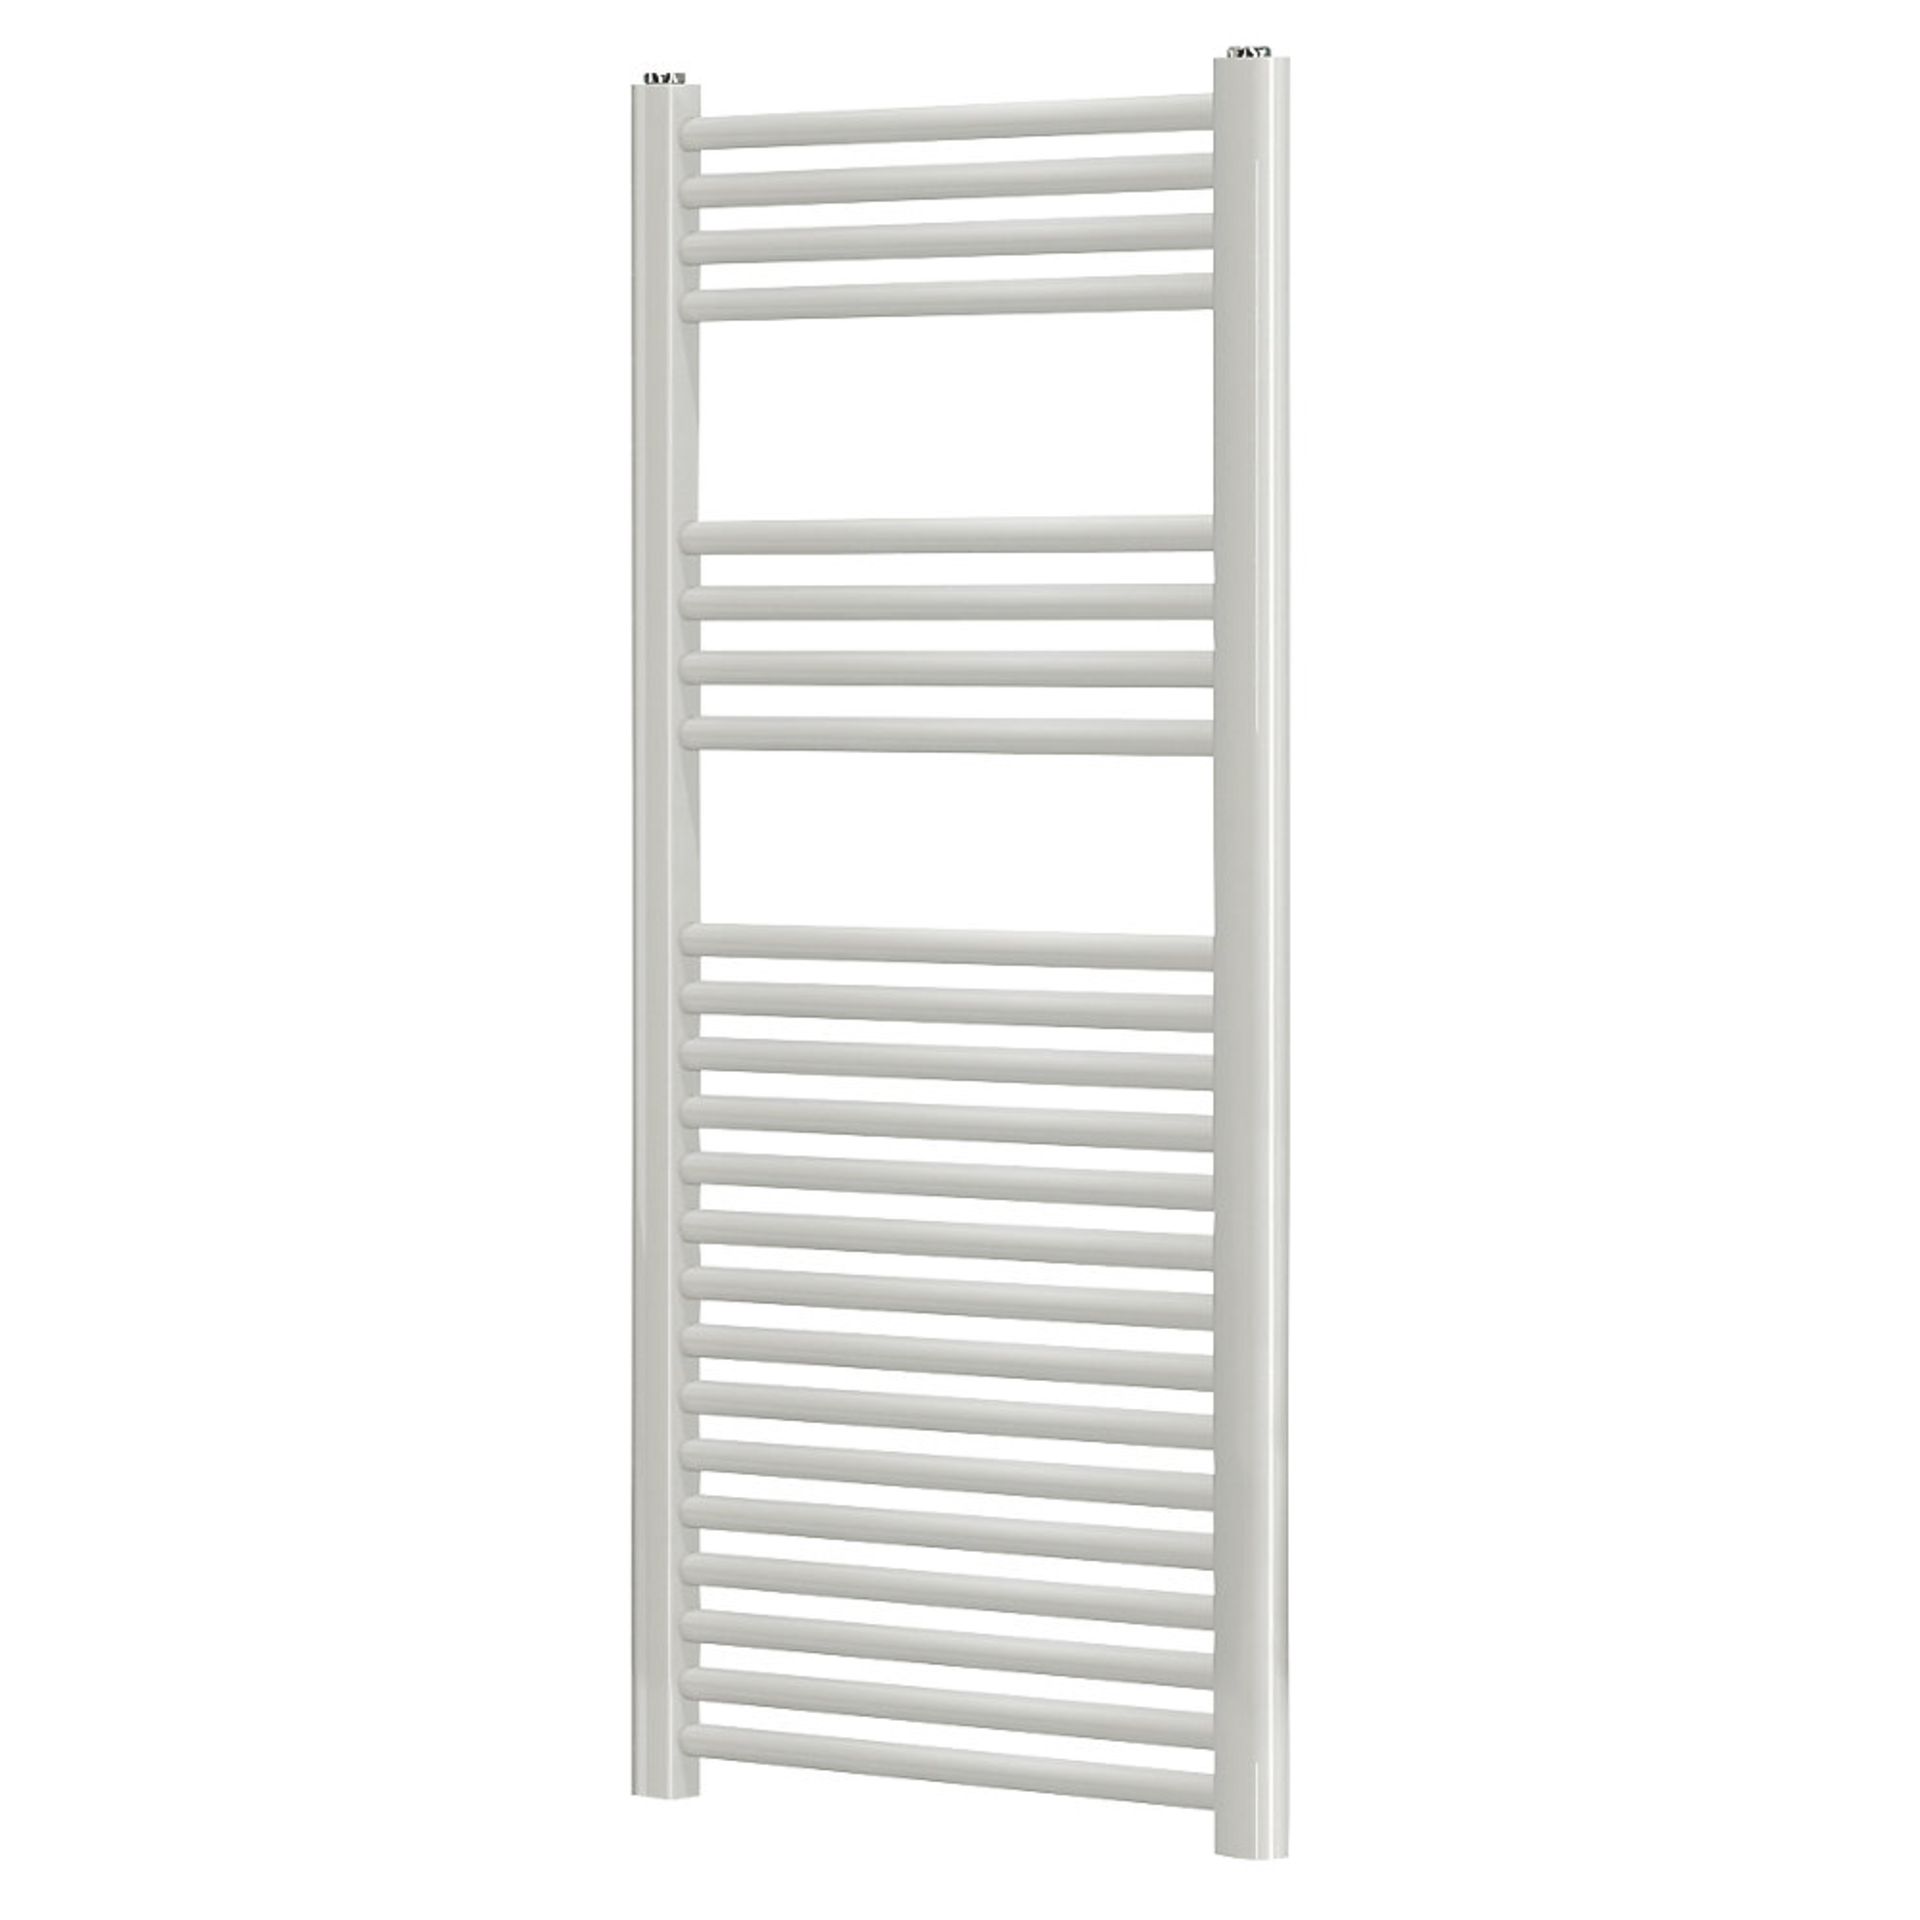 (QW220) 1200x450mm TOWEL LADDER RADIATOR WHITE. High quality steel construction with a powder-coated